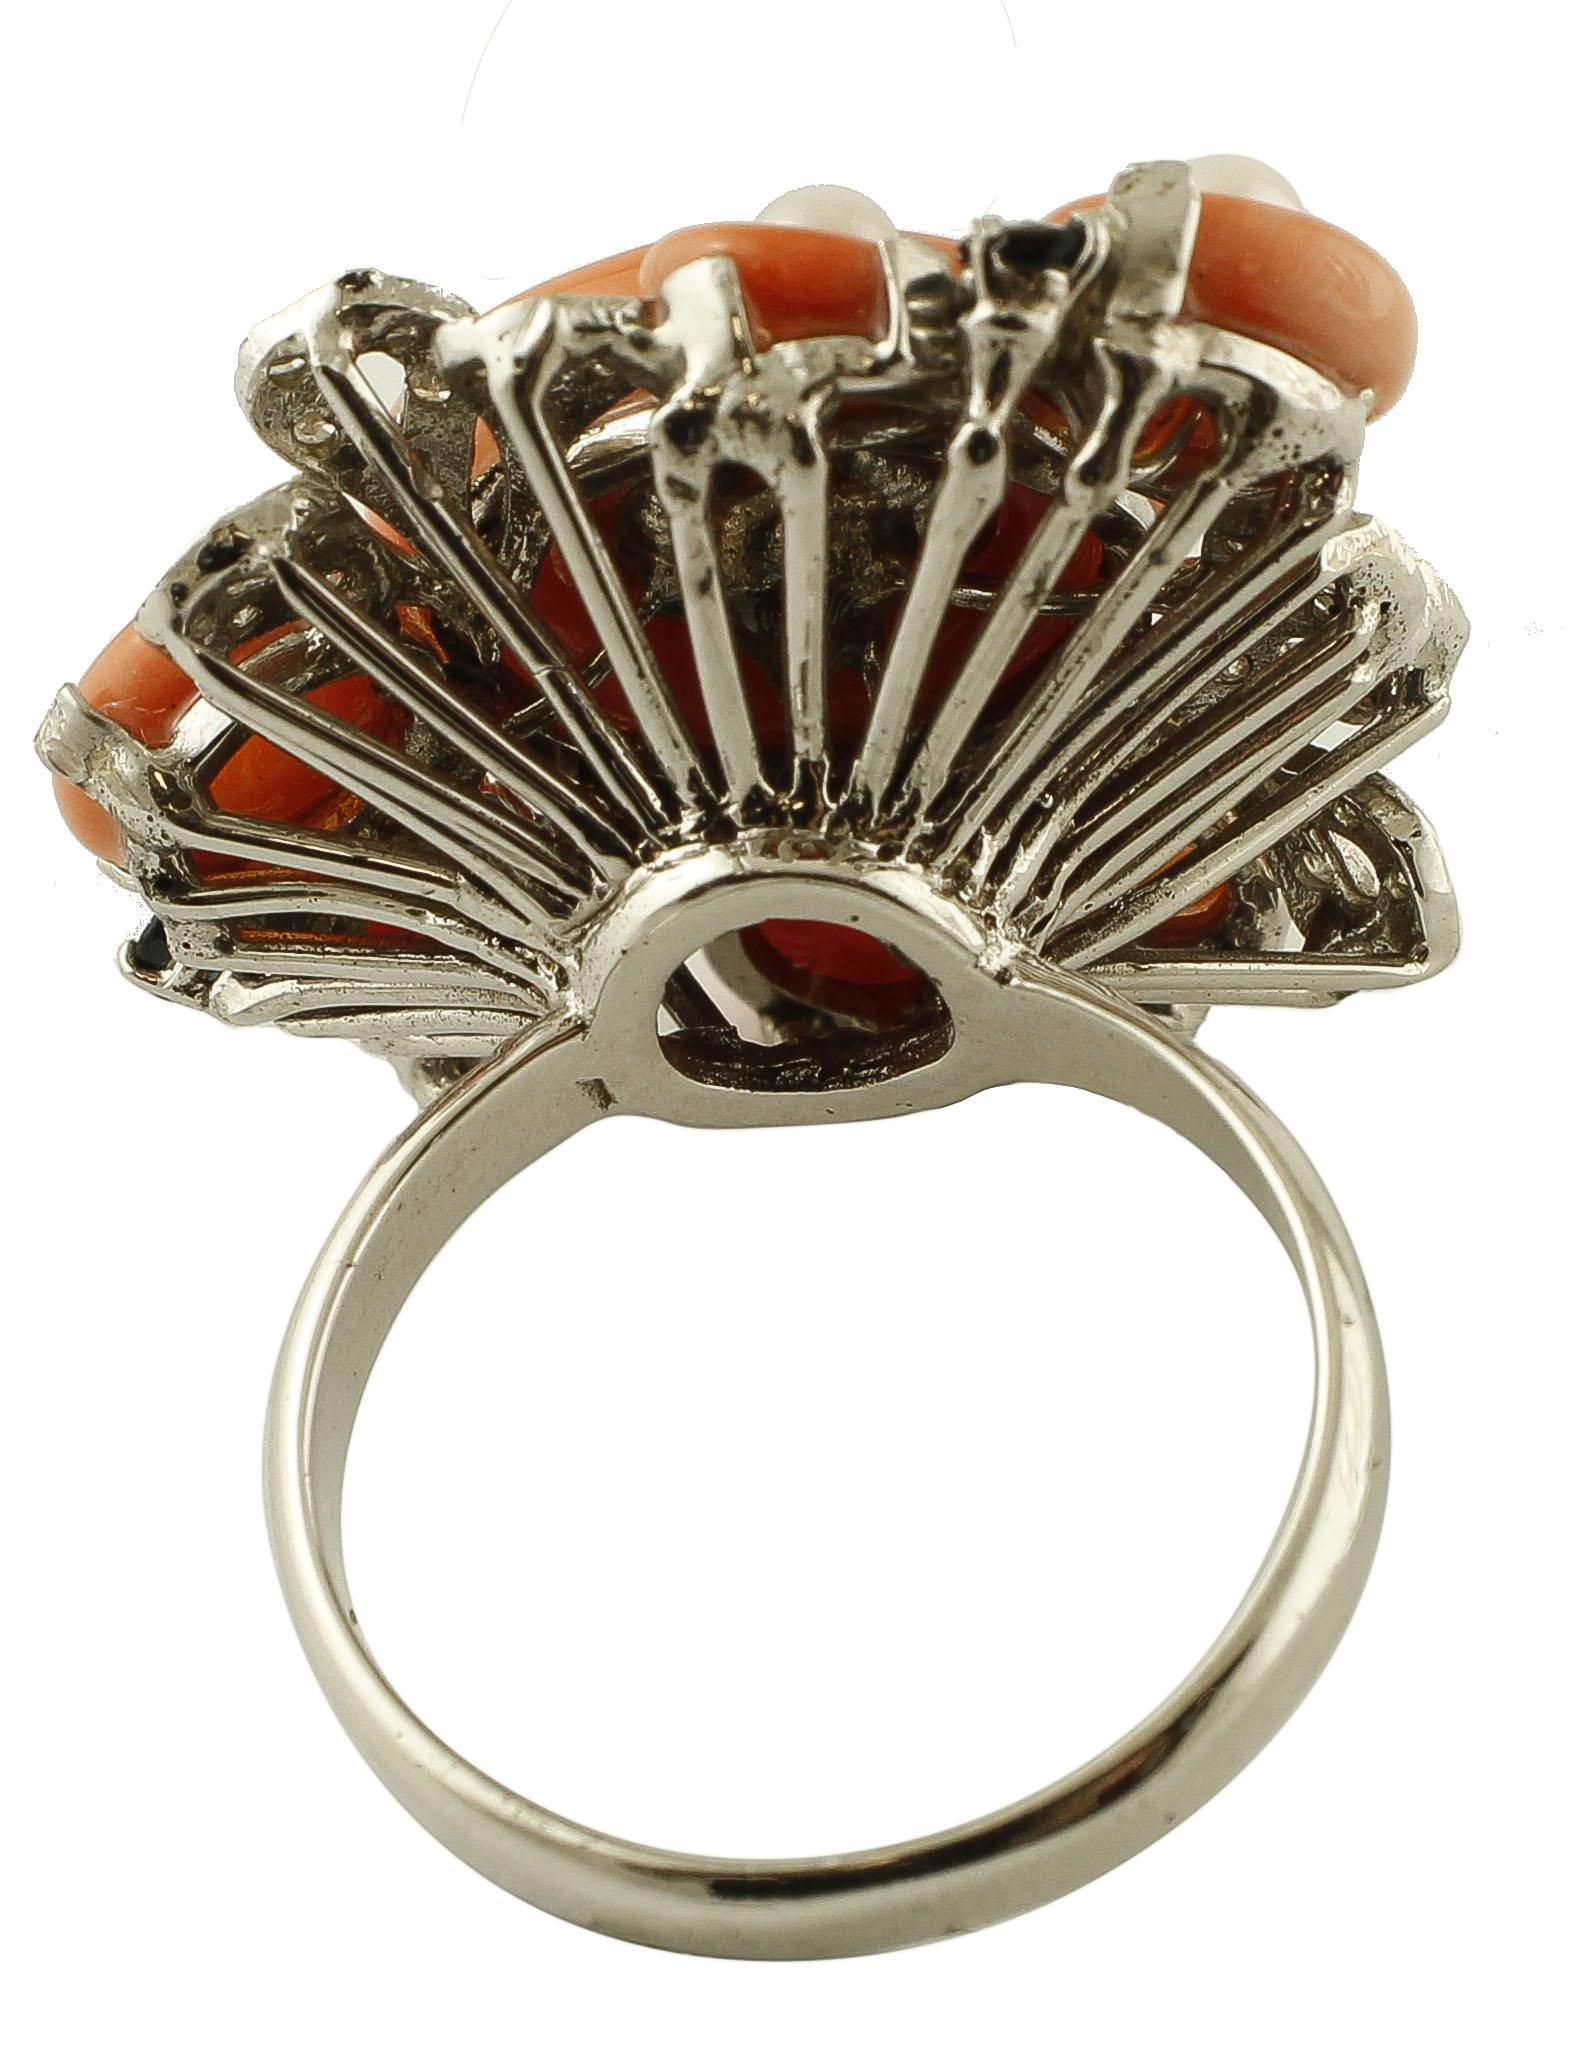 Mixed Cut Diamonds, Sapphires, Coral, Pearls, 14 Karat White Gold Vintage Ring For Sale